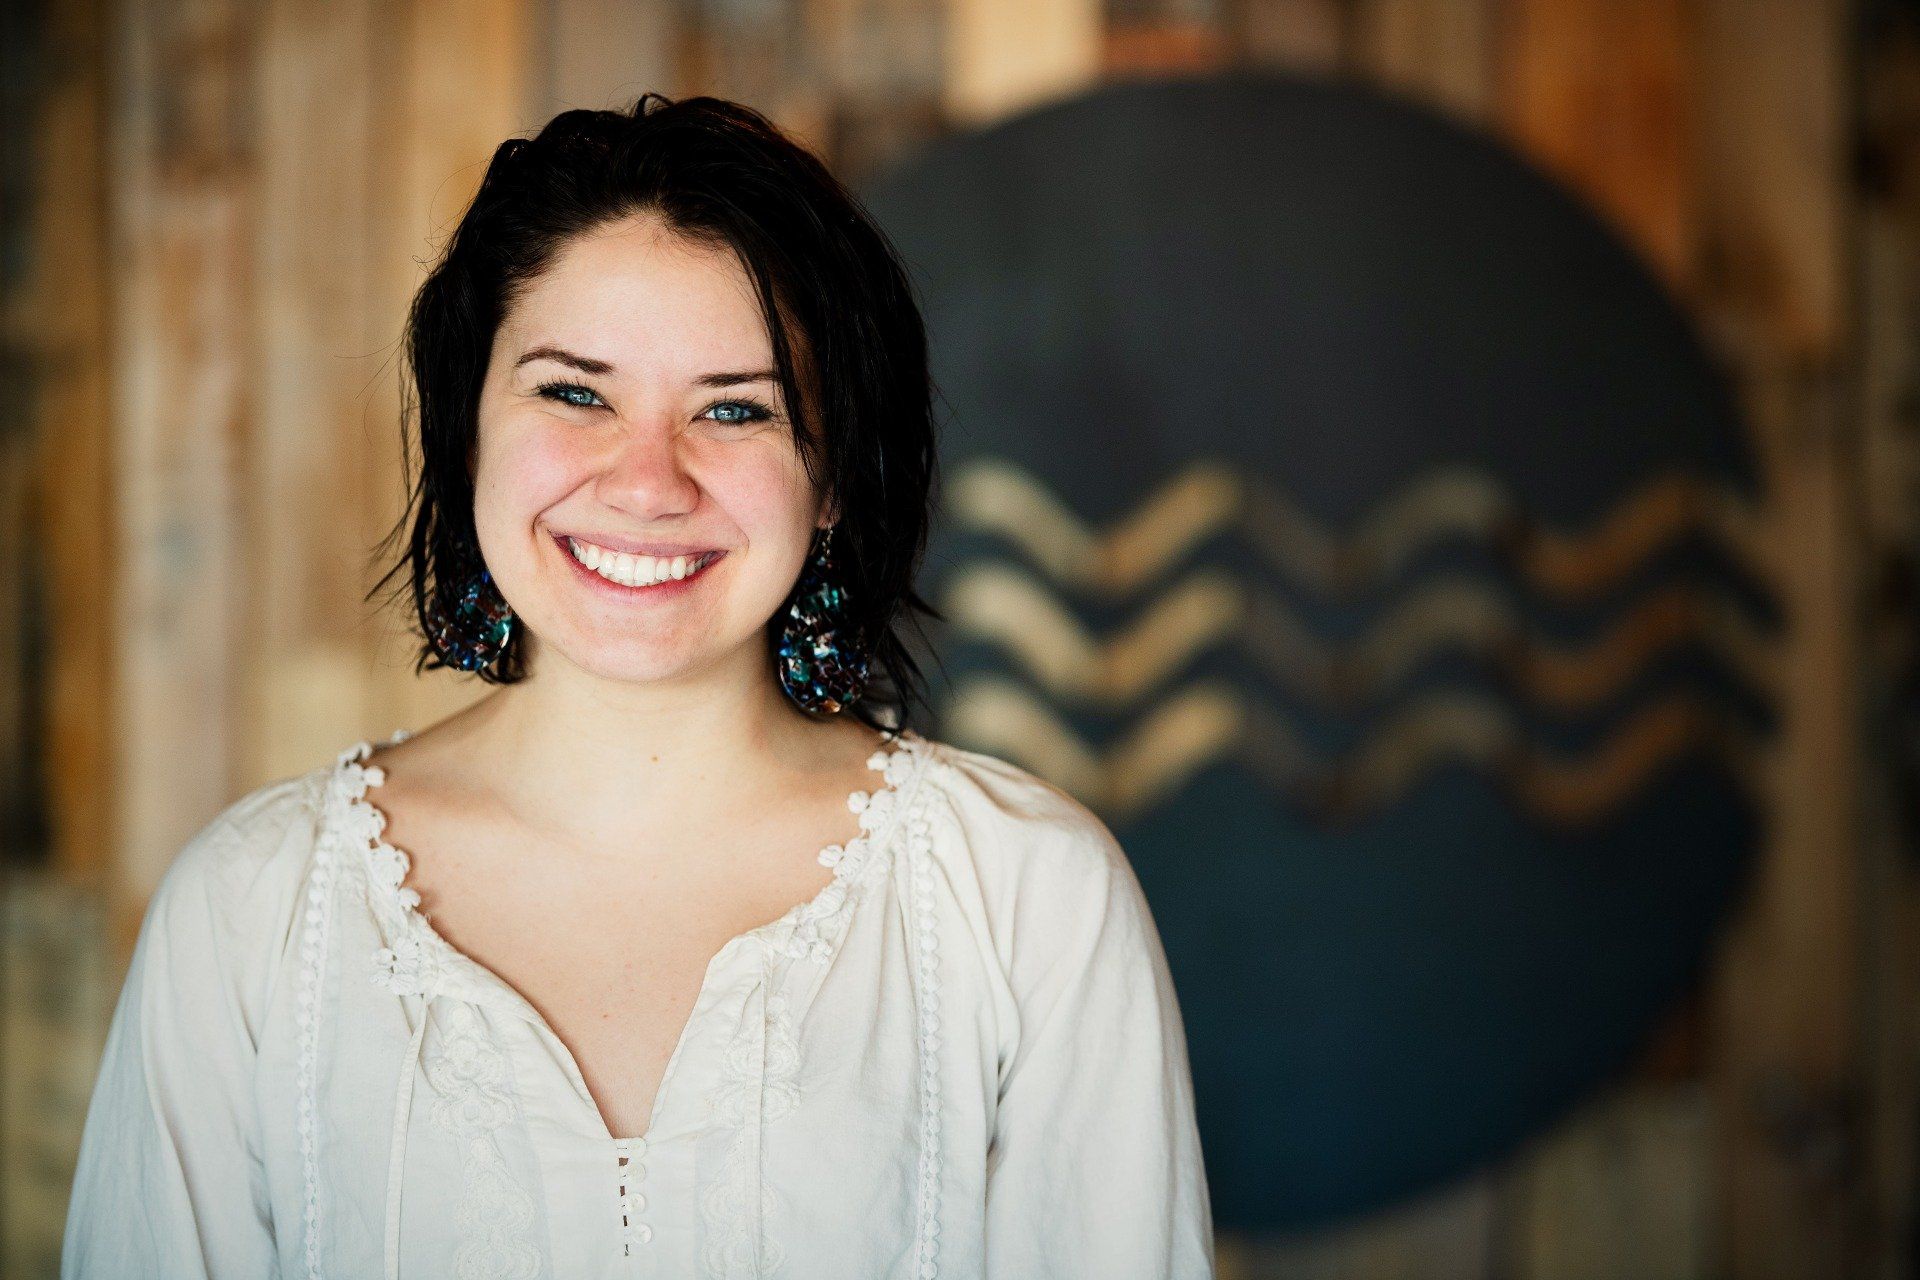 A woman in a white shirt is smiling in front of a wooden wall.